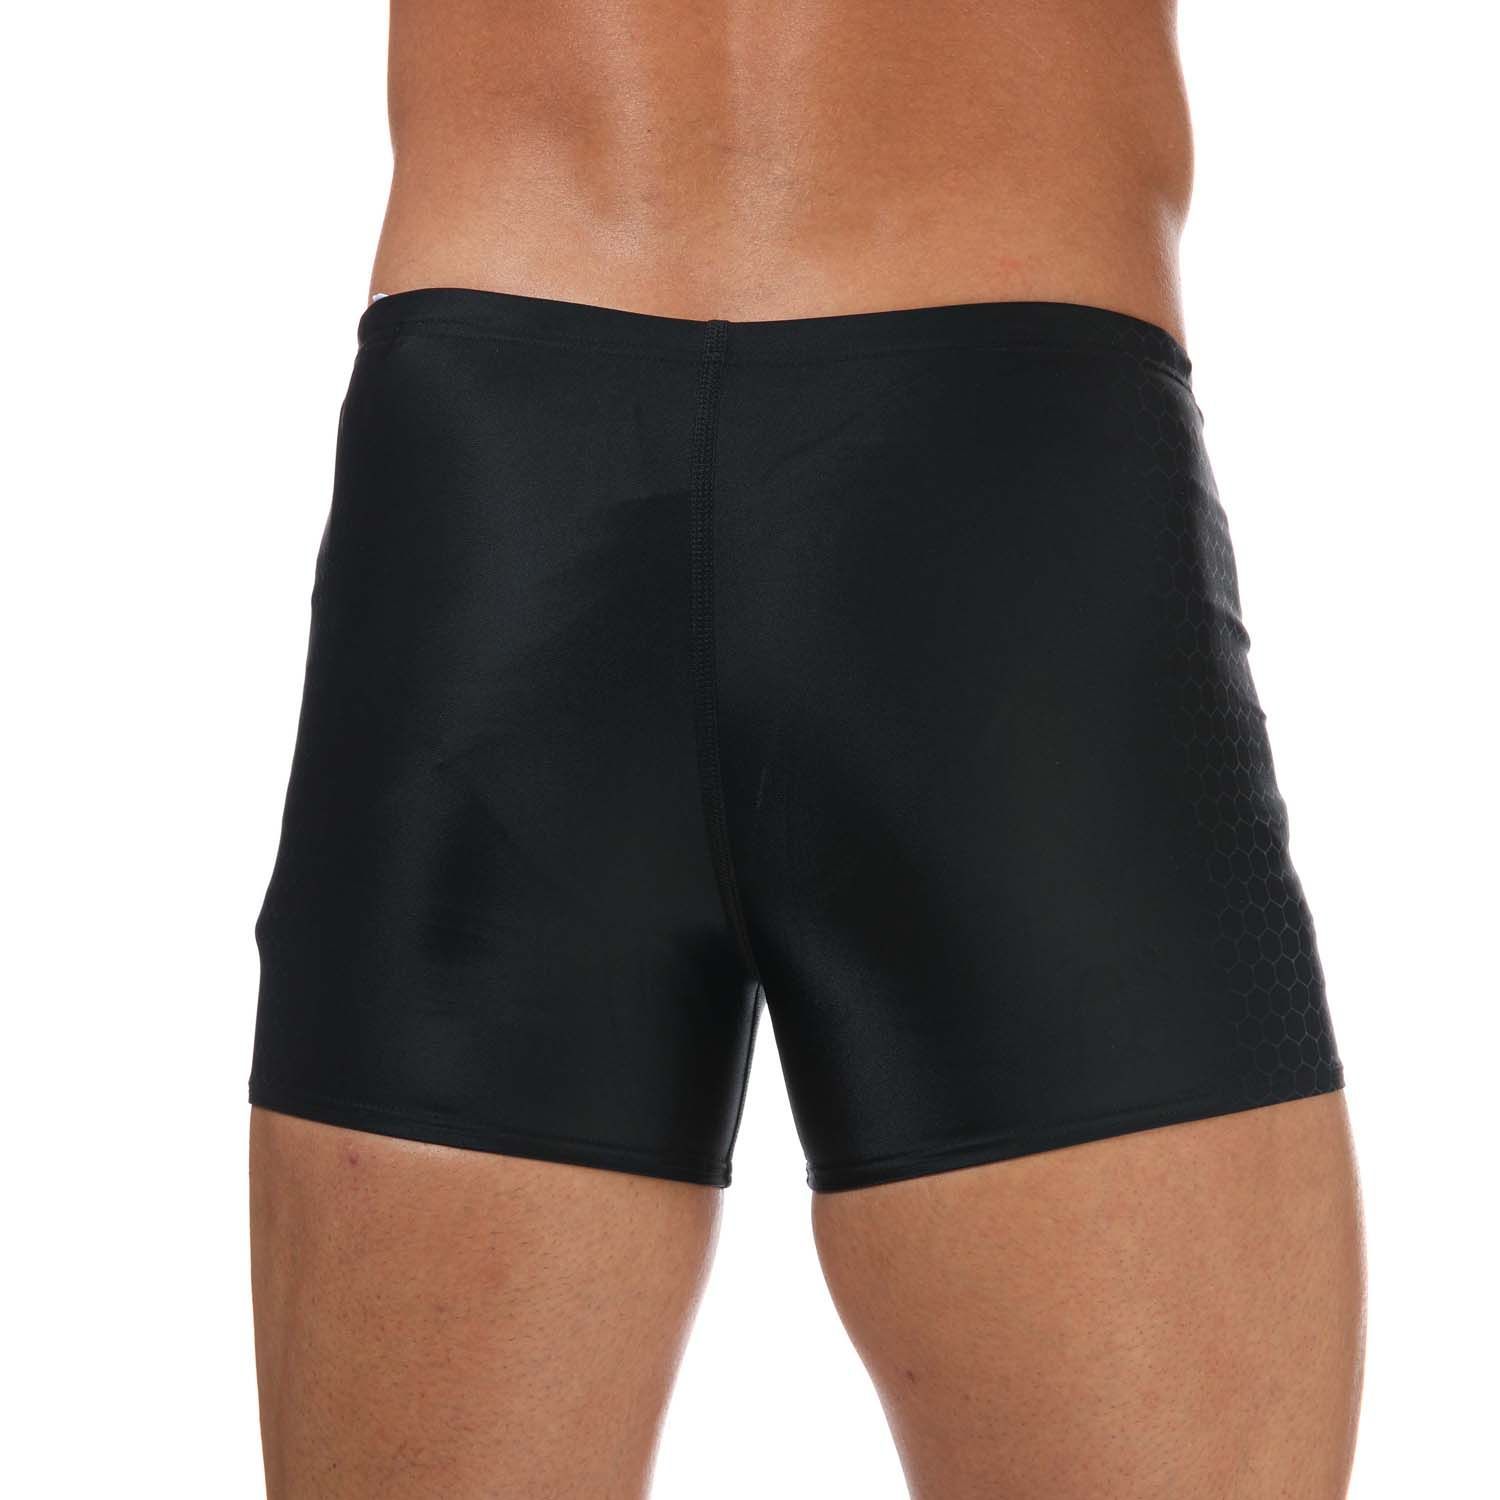 Mens Speedo Placement Aquashort in black grey.- Elastic waistband with adjustment.- Chlorine-resistant material.- Higher material density.- Quick drying.- UNIQUE colorful graphics.- Manufacturer's logo.- Body: 78% Nylon  22% Elastane. Lining: 100% Polyester.- 8124249023